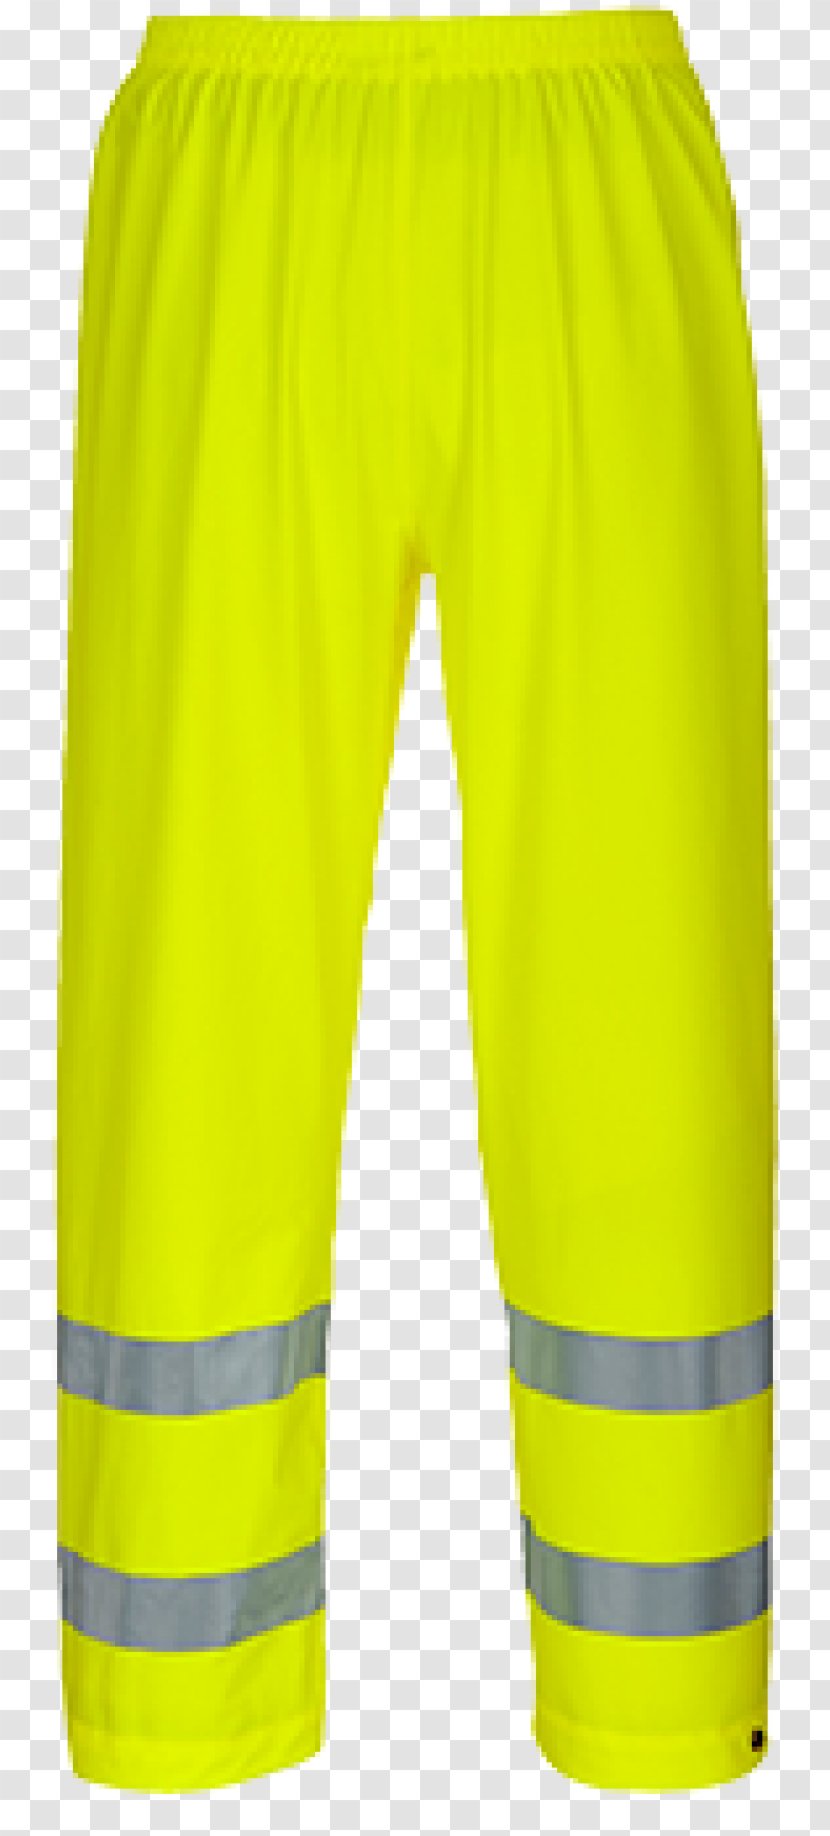 High-visibility Clothing Pants Workwear Jacket - Waistcoat - Trouser Transparent PNG